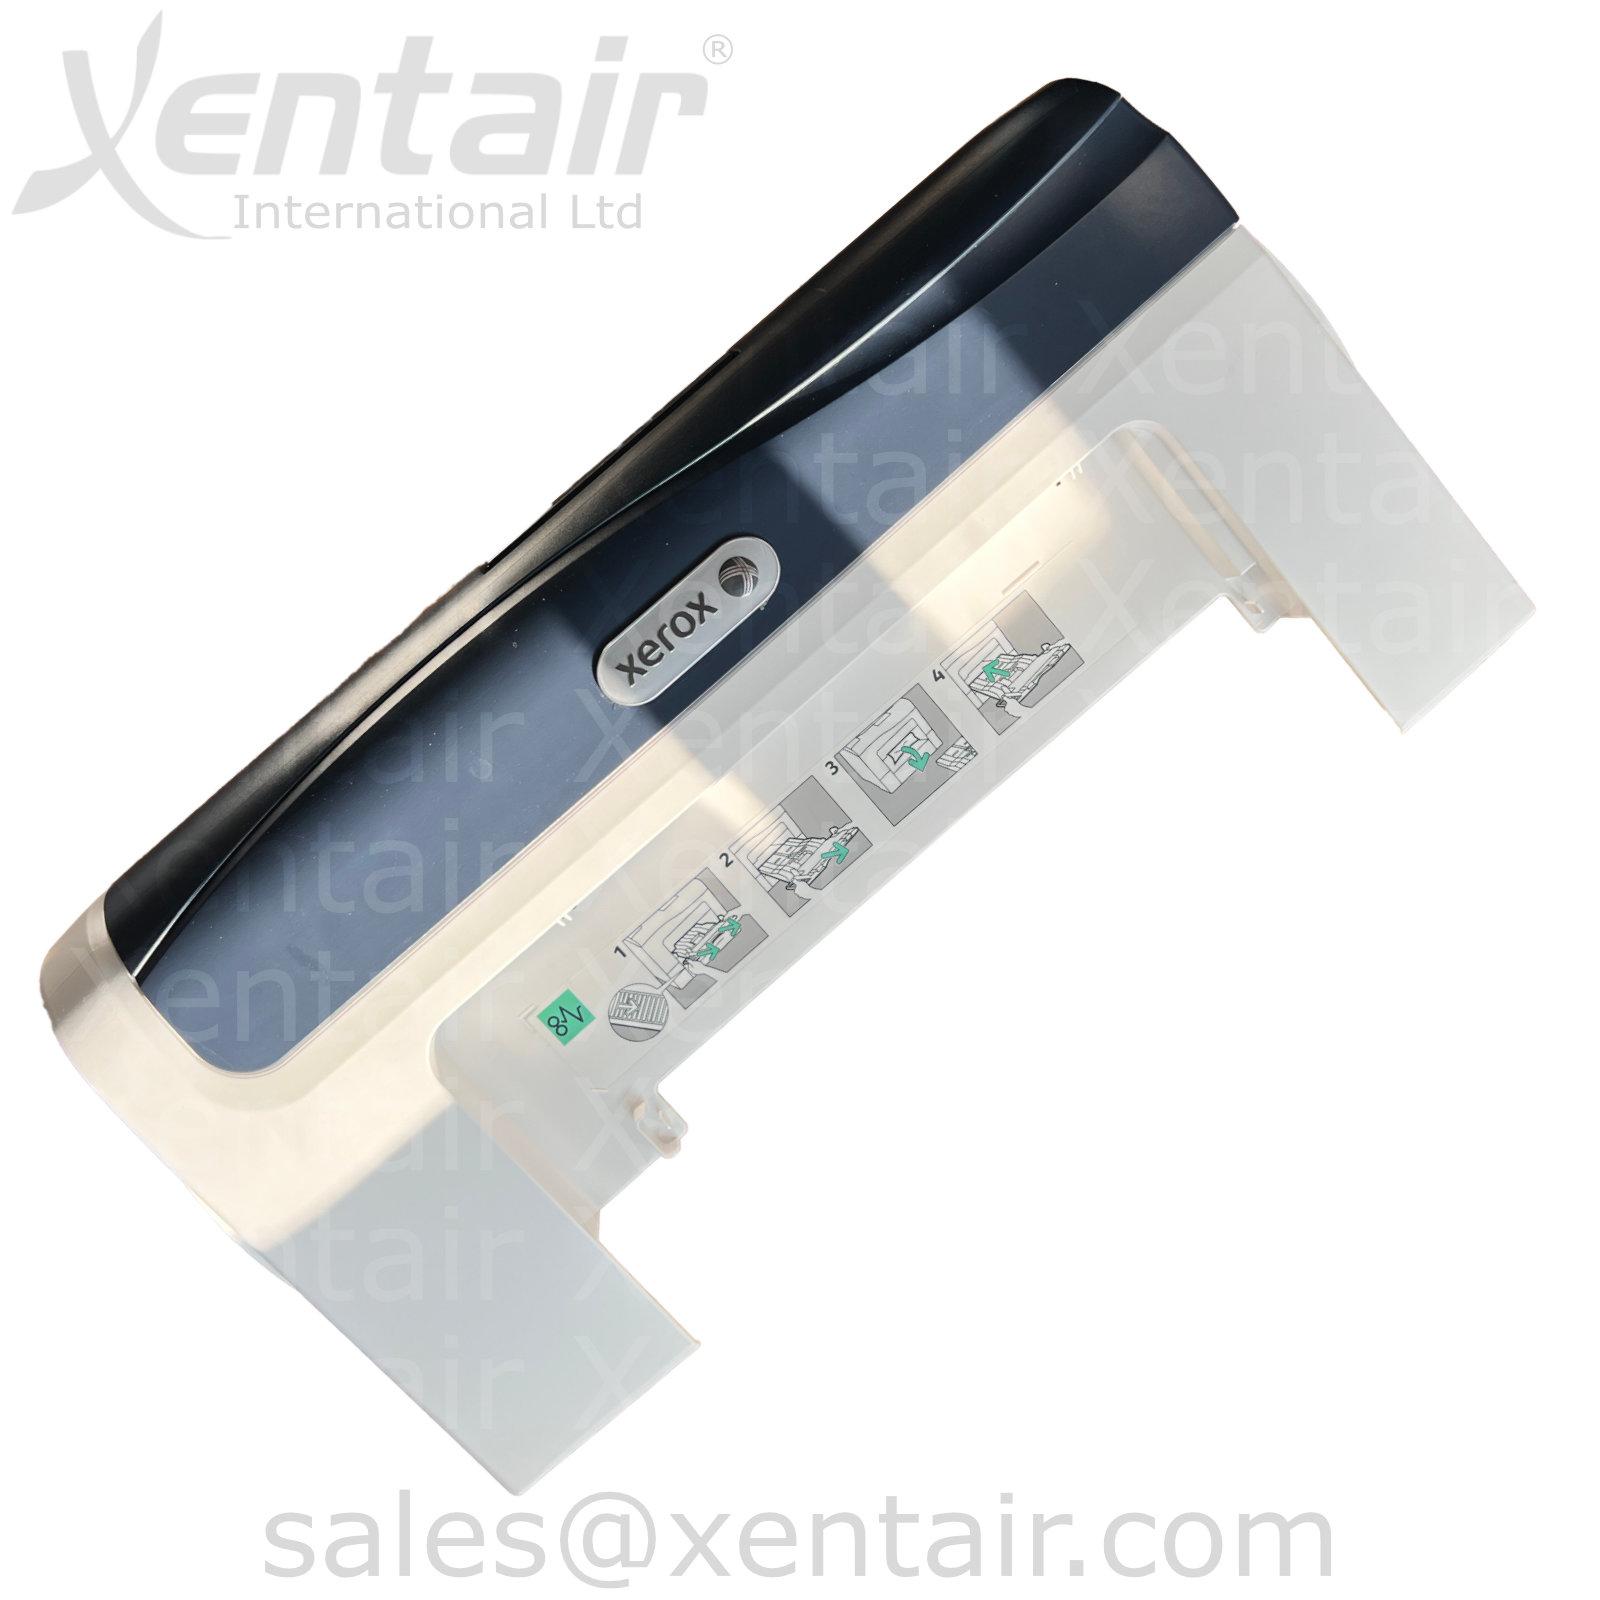 Xerox® VersaLink® B405 Front Cover Assembly 948K02640